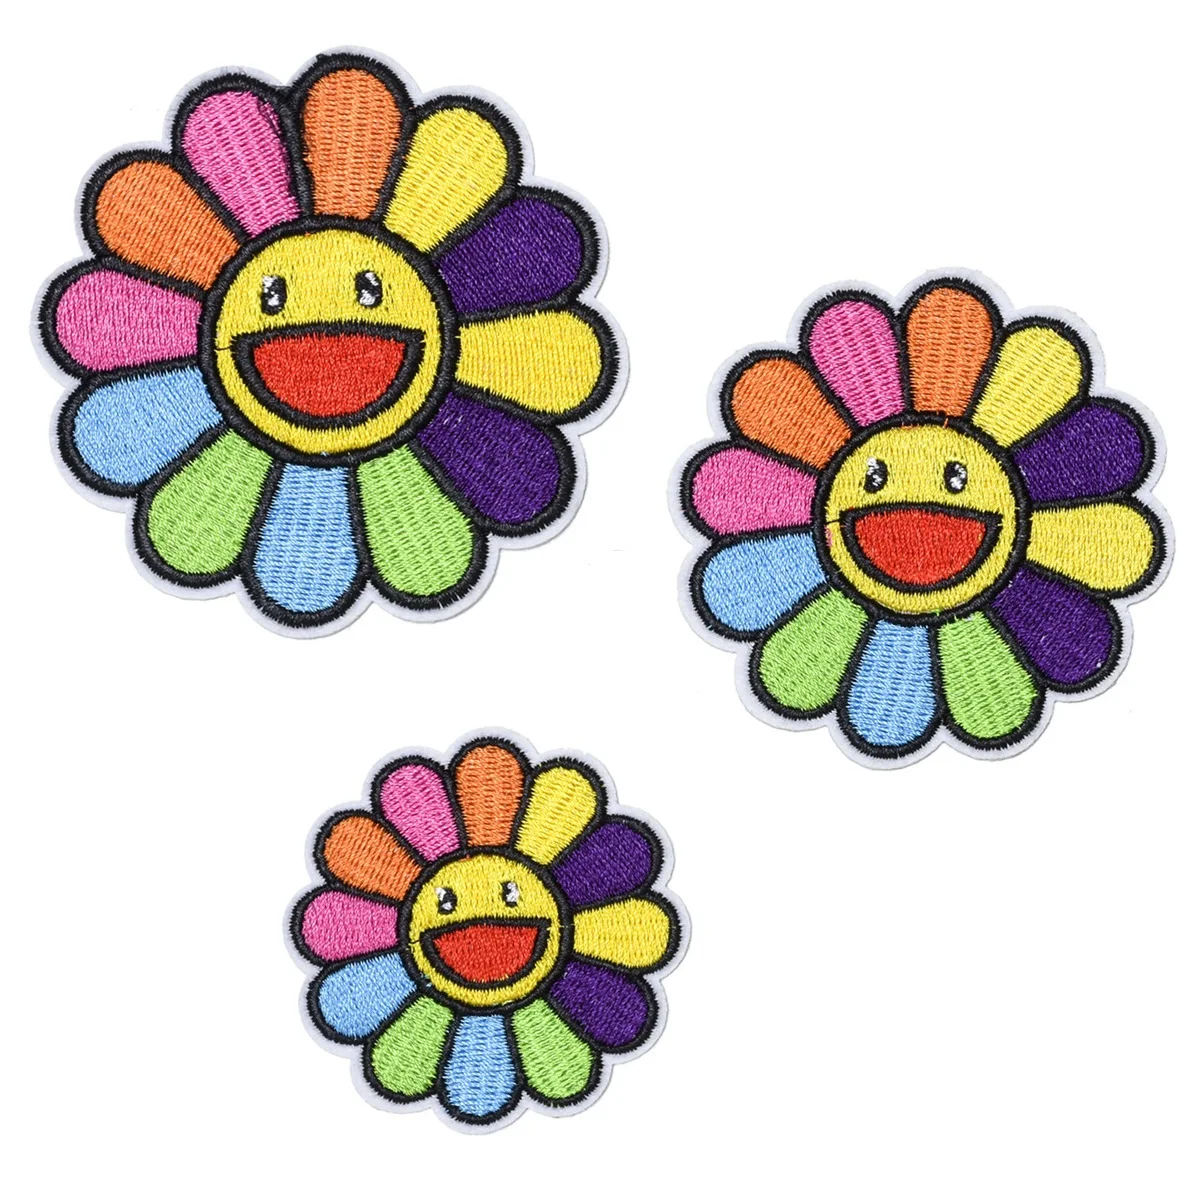 

Color Sun flowers Smiley Series For on DIY Clothes Ironing Embroidered Patches For Hat Jeans Sticker Sew Patch Applique Badge